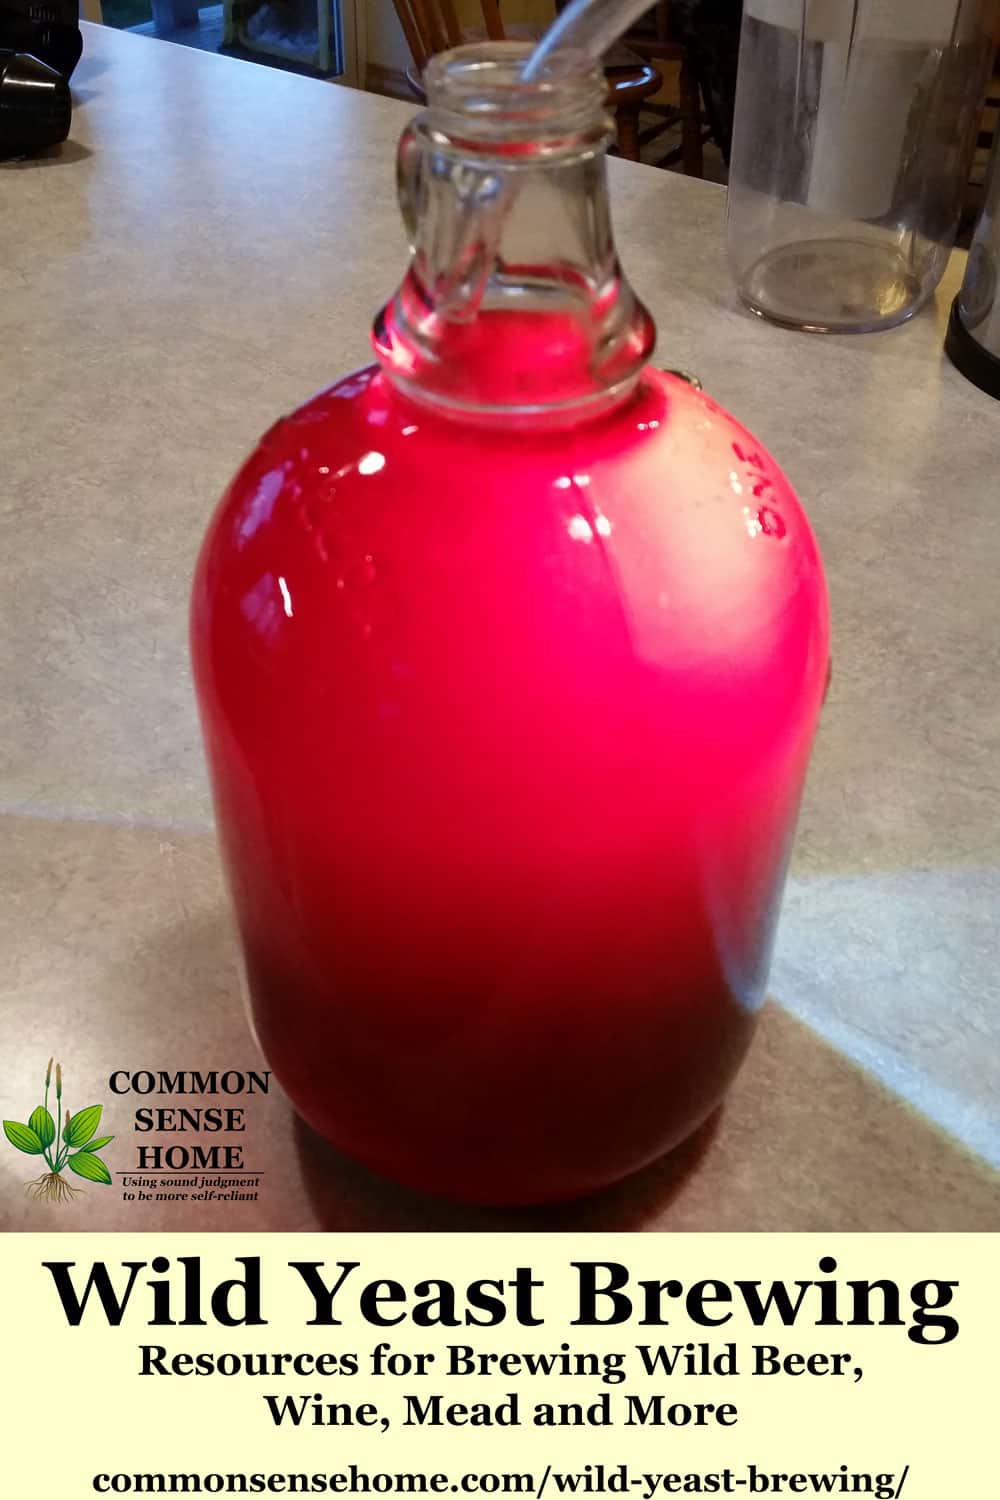 Gallon glass jug filled with hot pink wild wine